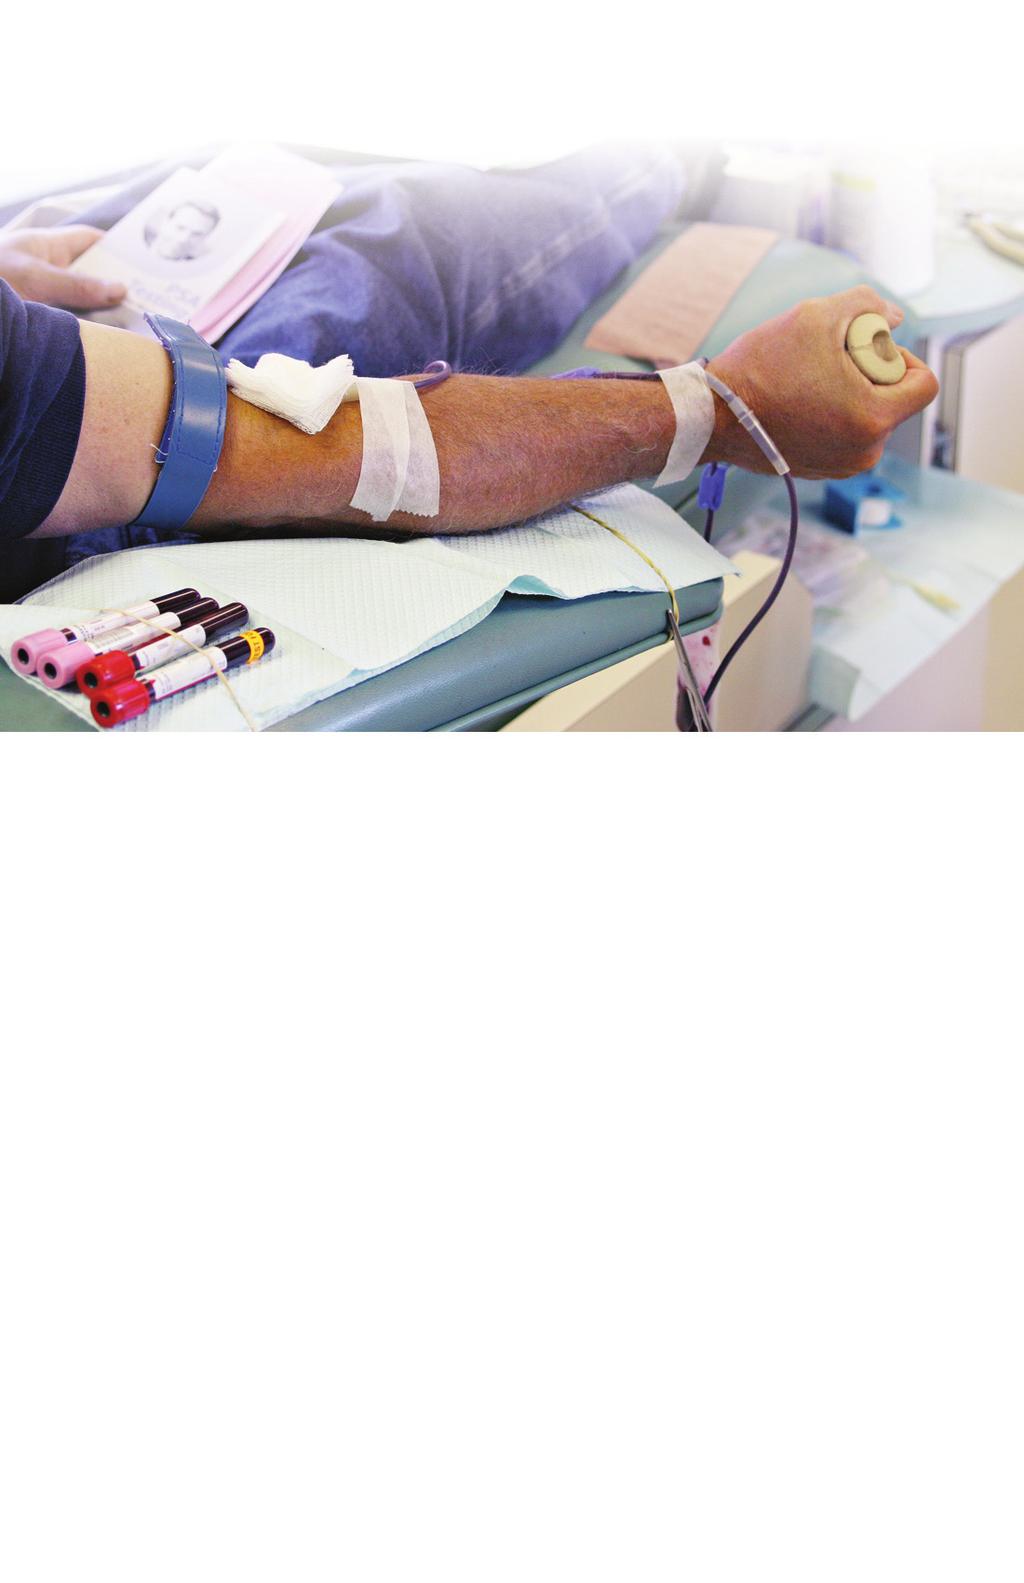 How Blood Donations Help Save Lives.